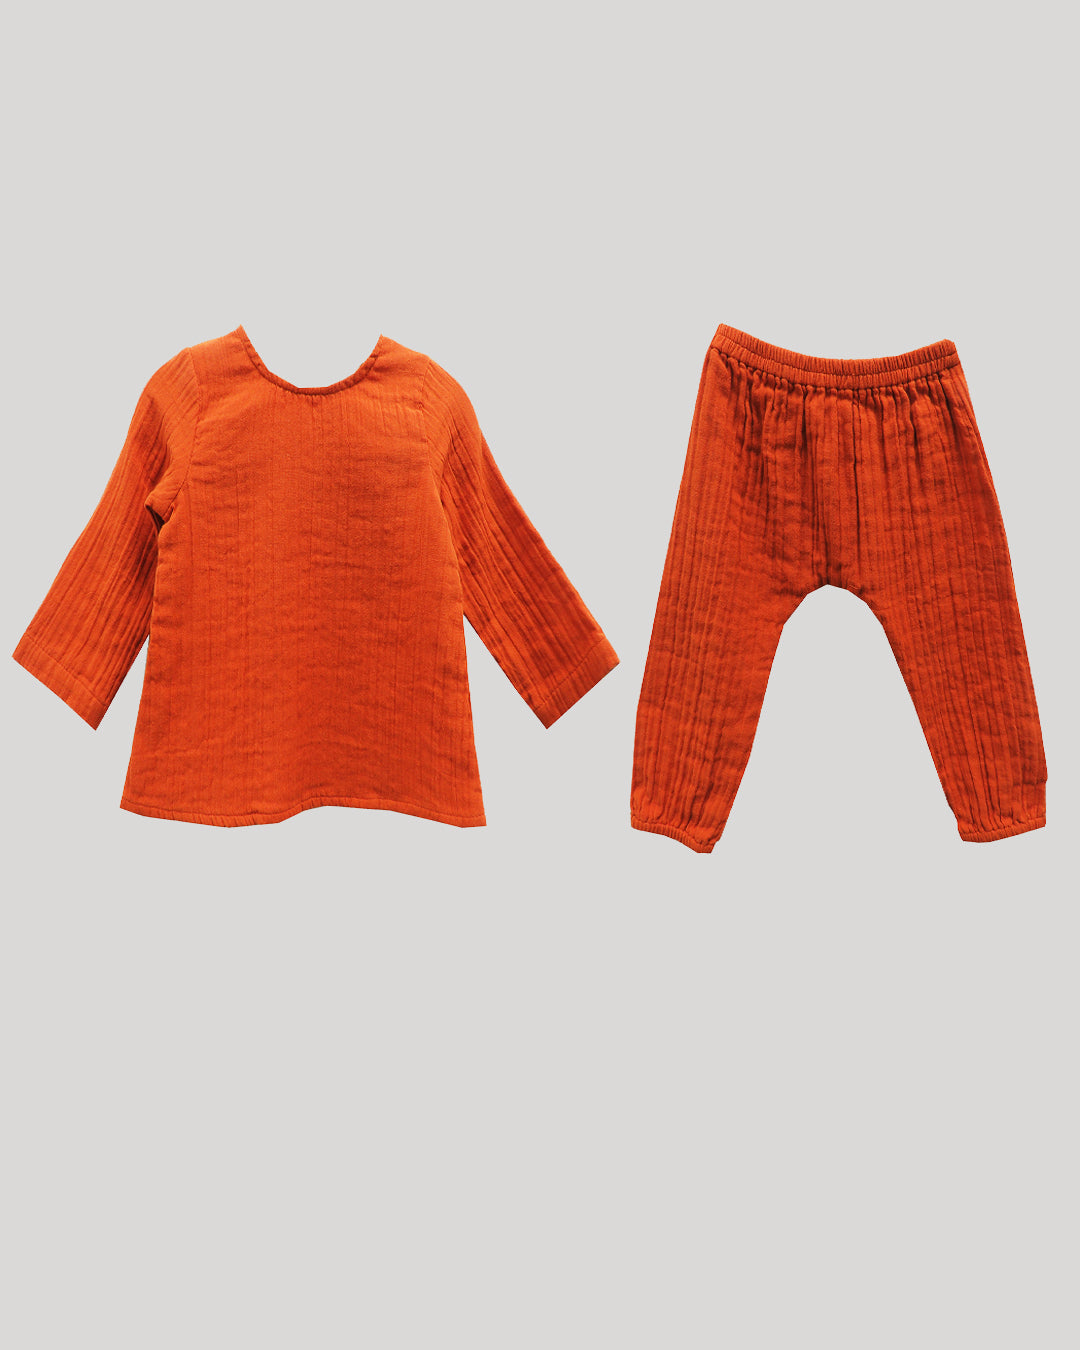 ORANGE CORAL CO-ORD SET WITH A FULL SLEEVED TOP AND PANTS IN SOFT,COTTON DOUBLE WEAVE